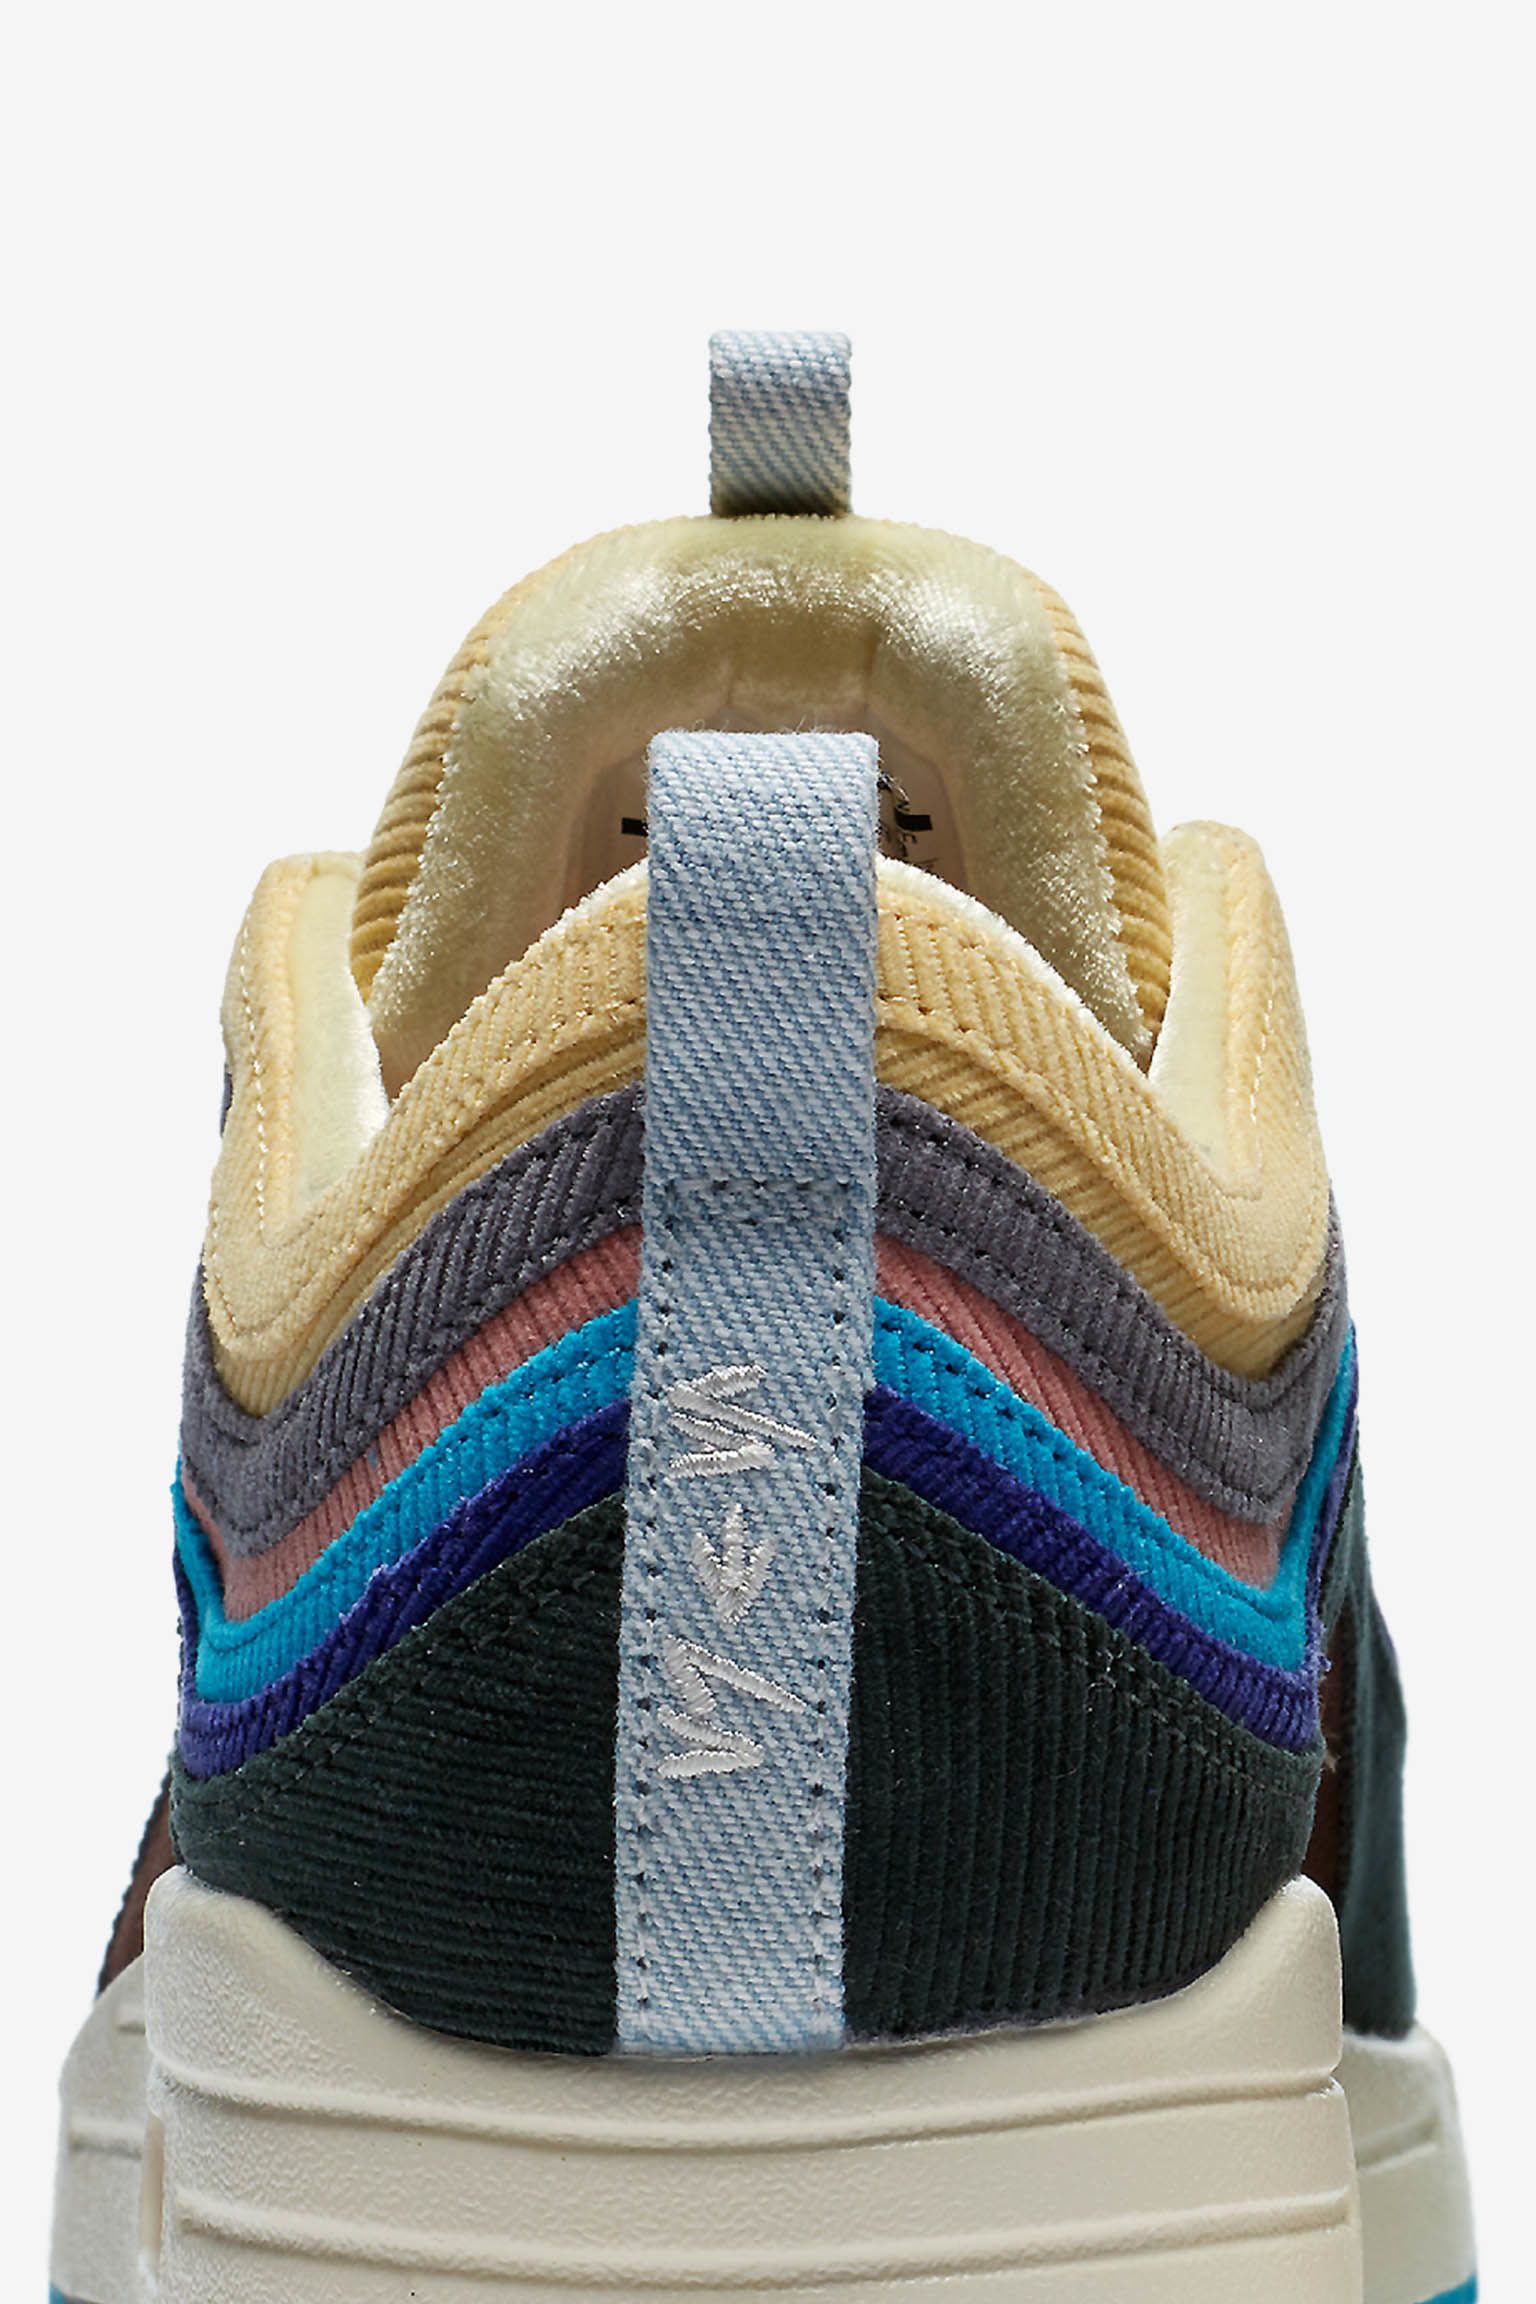 Nike Air Max 1/97 'Sean Wotherspoon' Release Date. Nike SNKRS